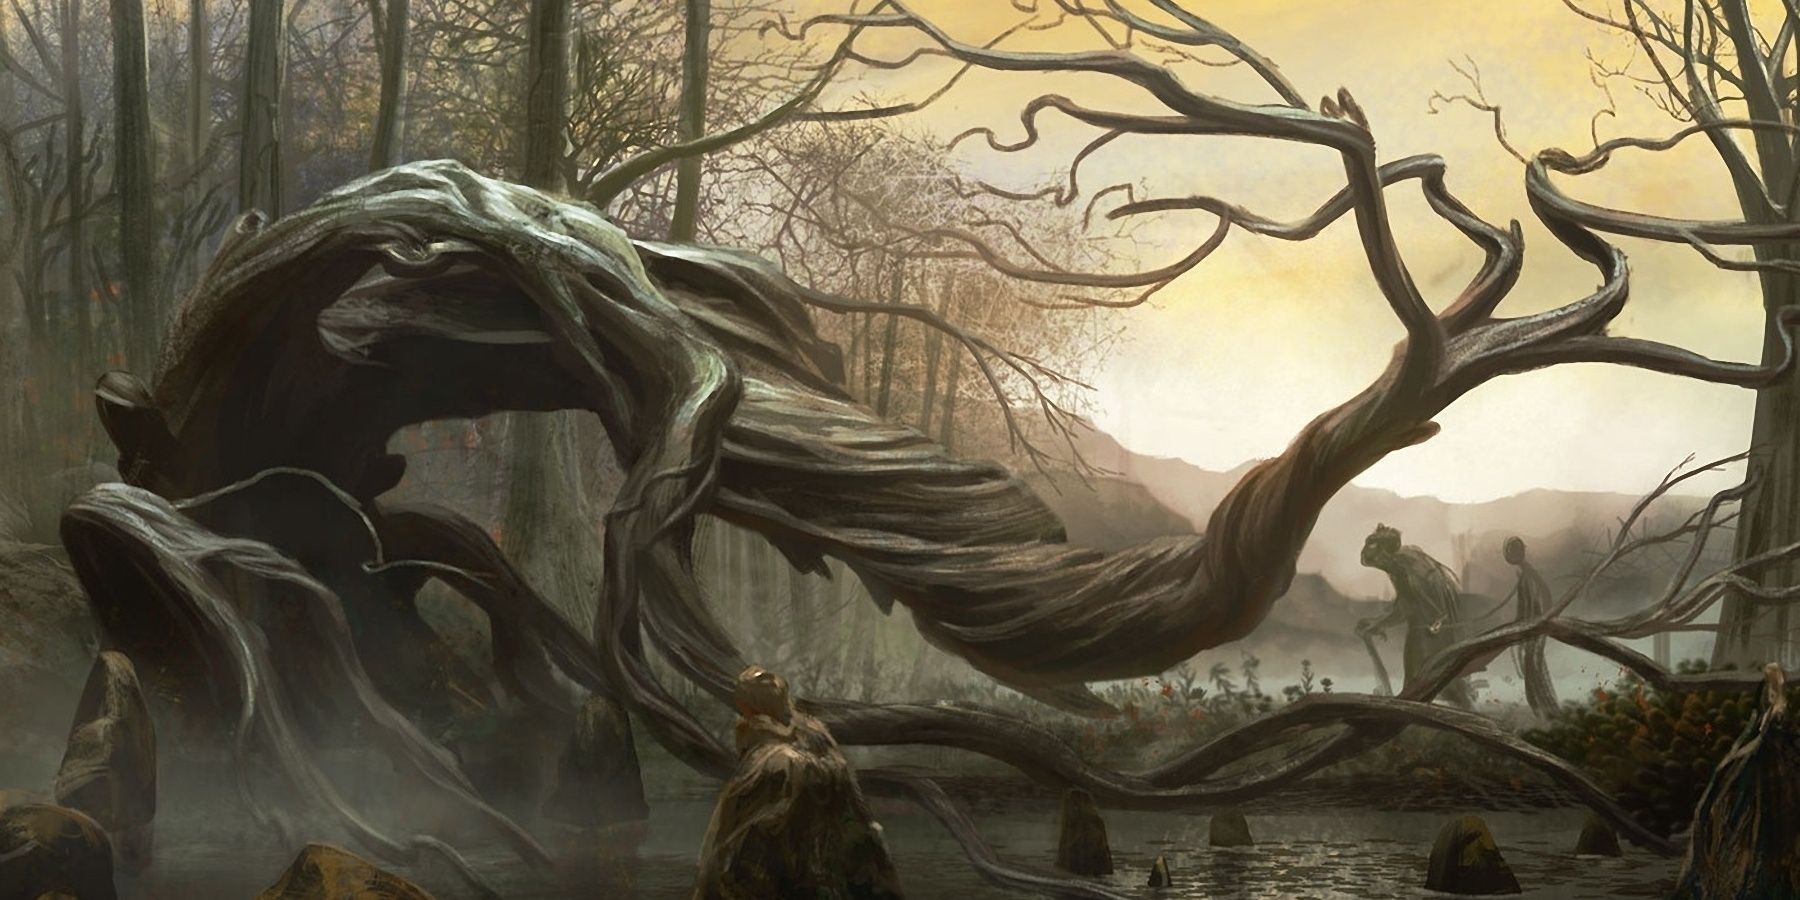 Dungeons And Dragons Gnarled Tree Twisted In Swamp Computer Concept Art